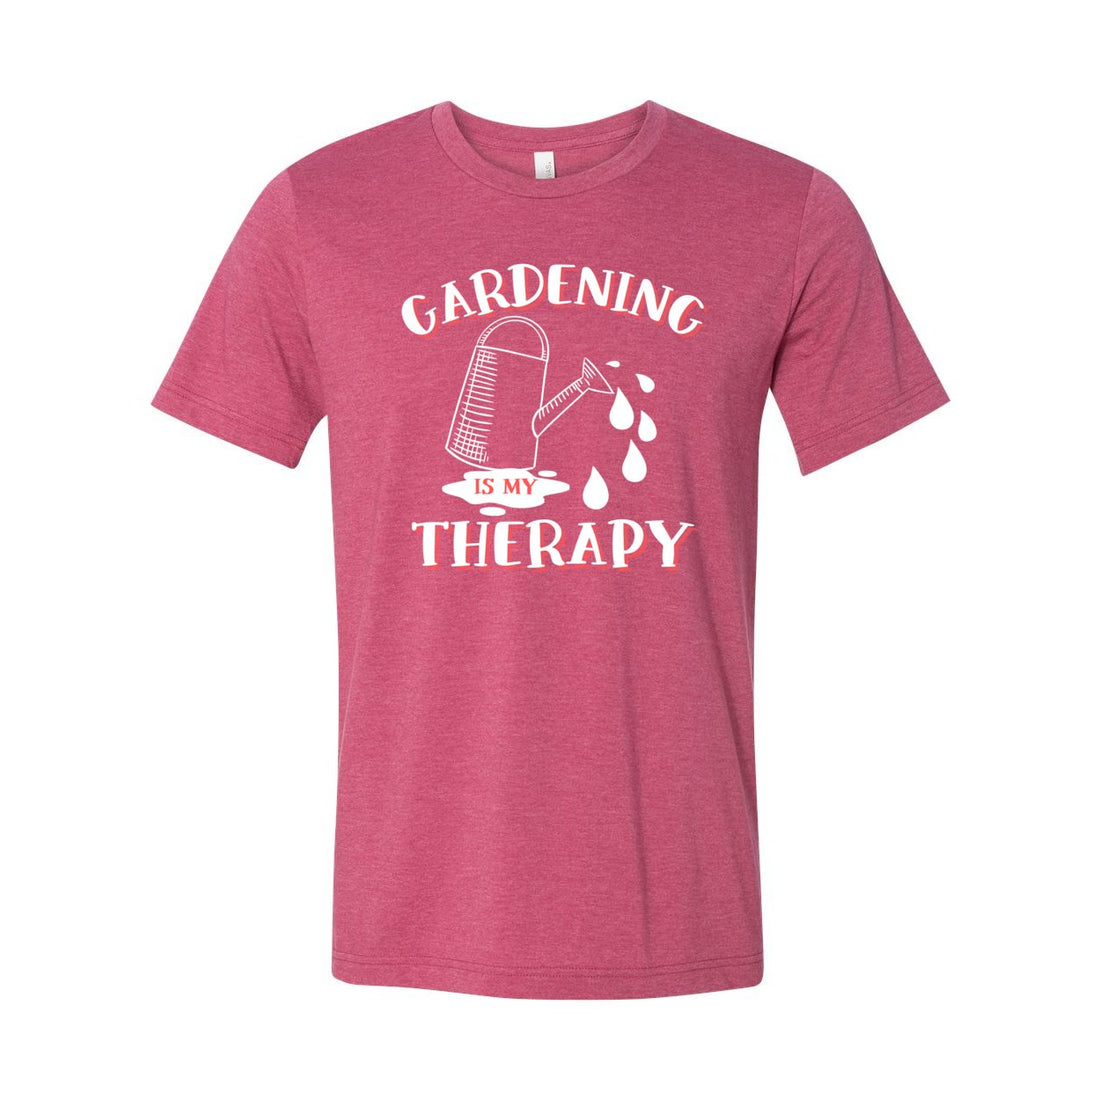 Gardening Therapy Short Sleeve Jersey Tee - T-Shirts - Positively Sassy - Gardening Therapy Short Sleeve Jersey Tee